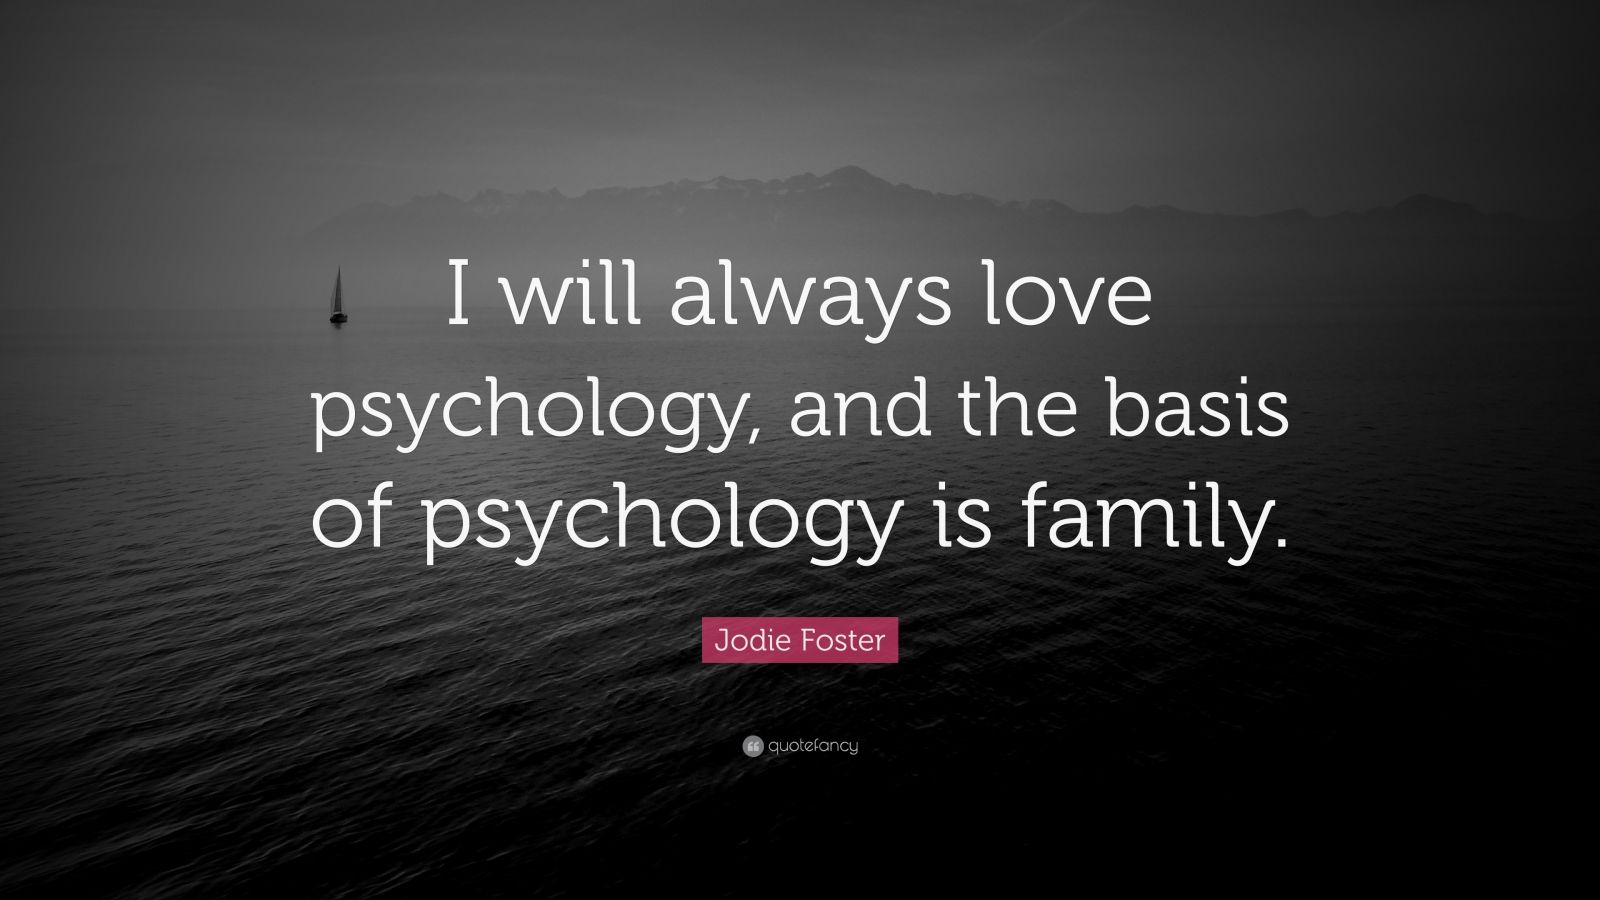 Jodie Foster Quote: “I will always love psychology, and the basis of